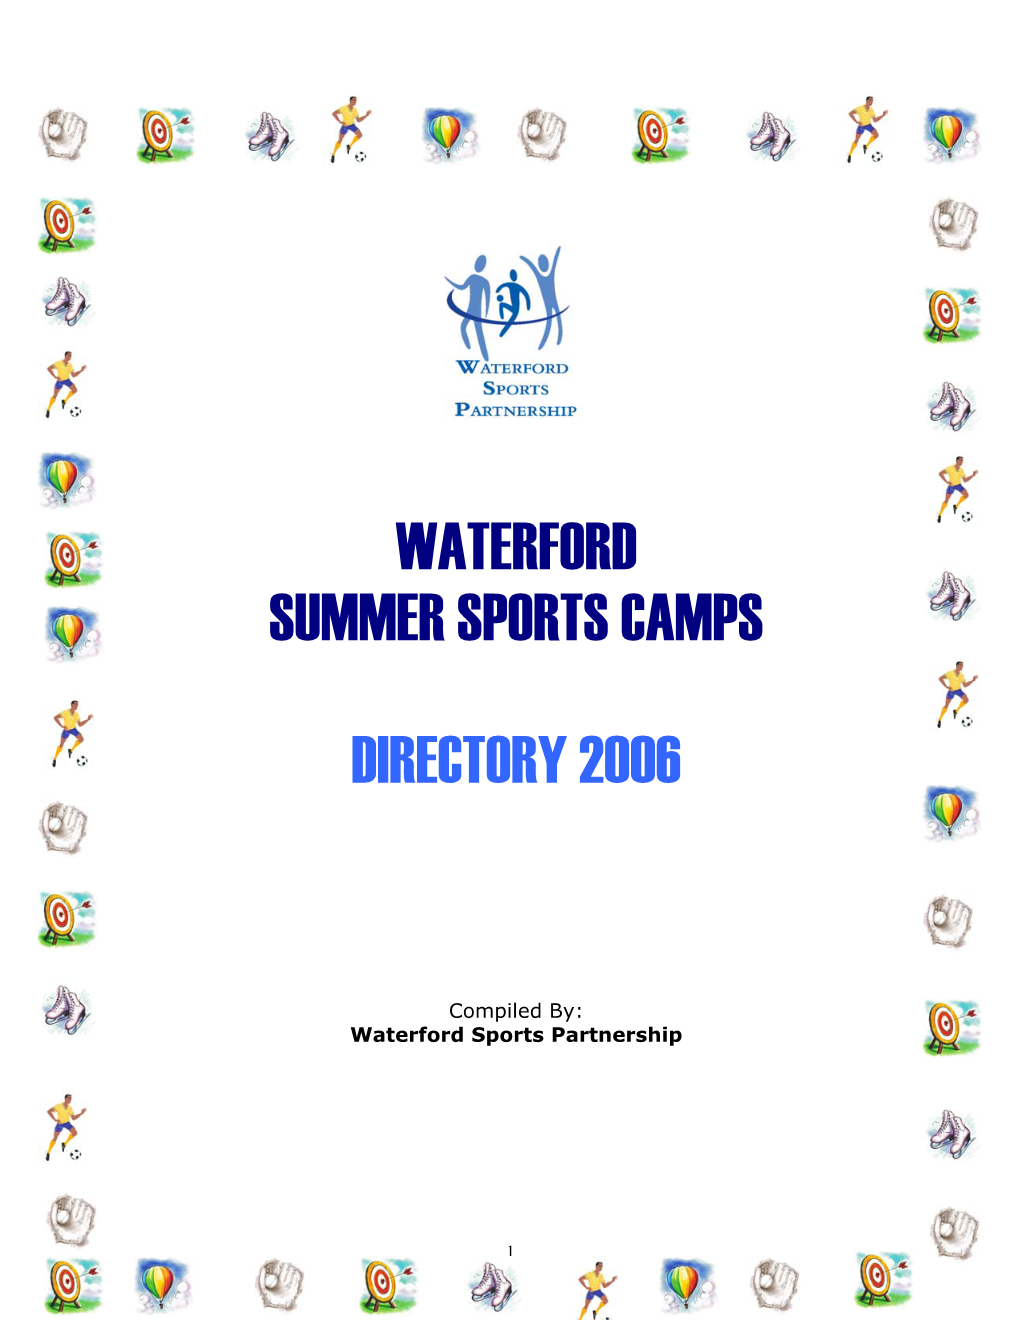 Waterford Summer Sports Camps Directory 2006